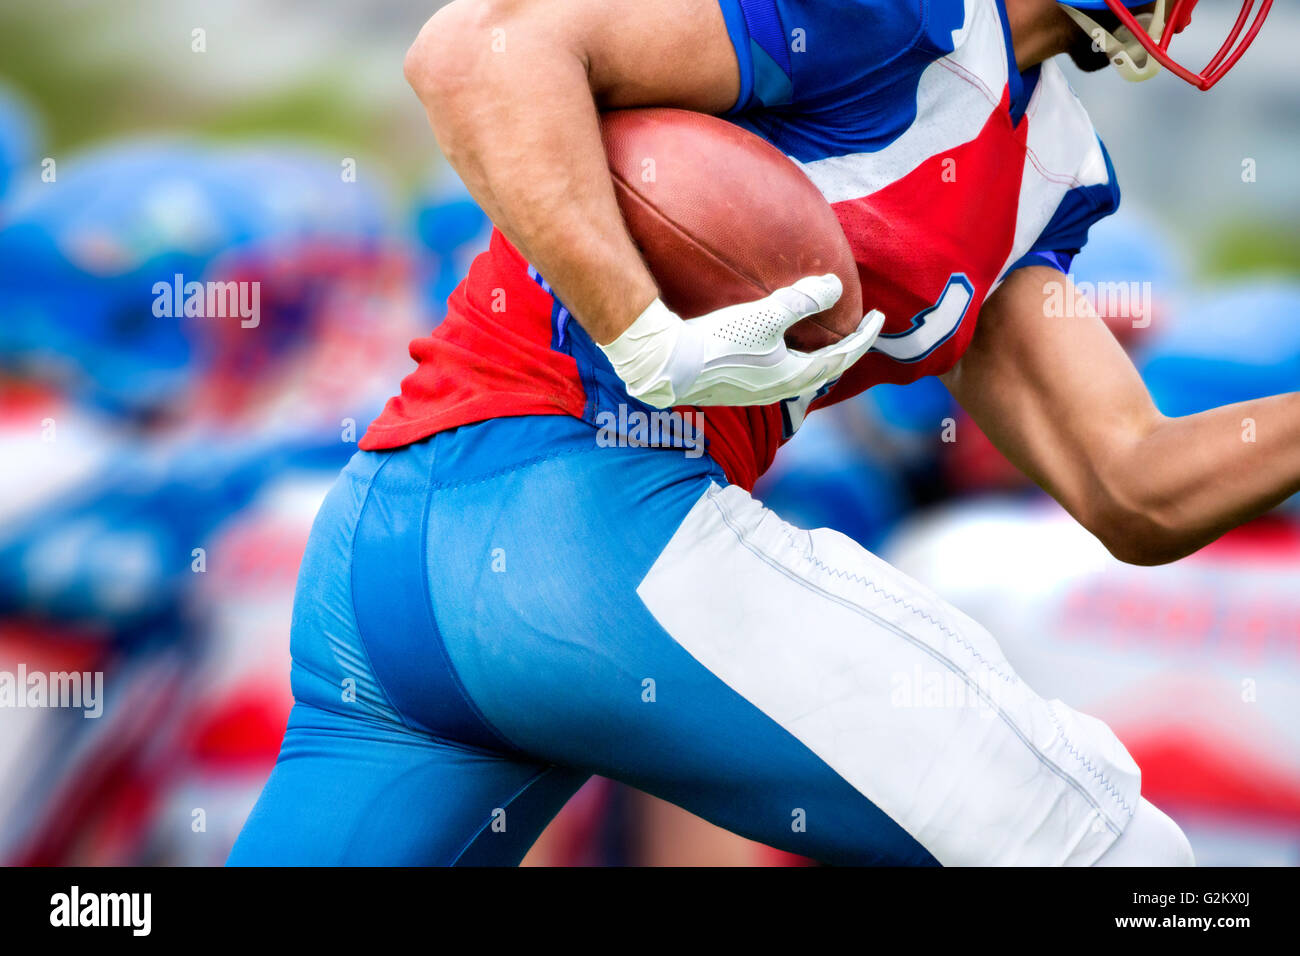 Side view of american football player who runs with the ball to make a touchdown. Stock Photo